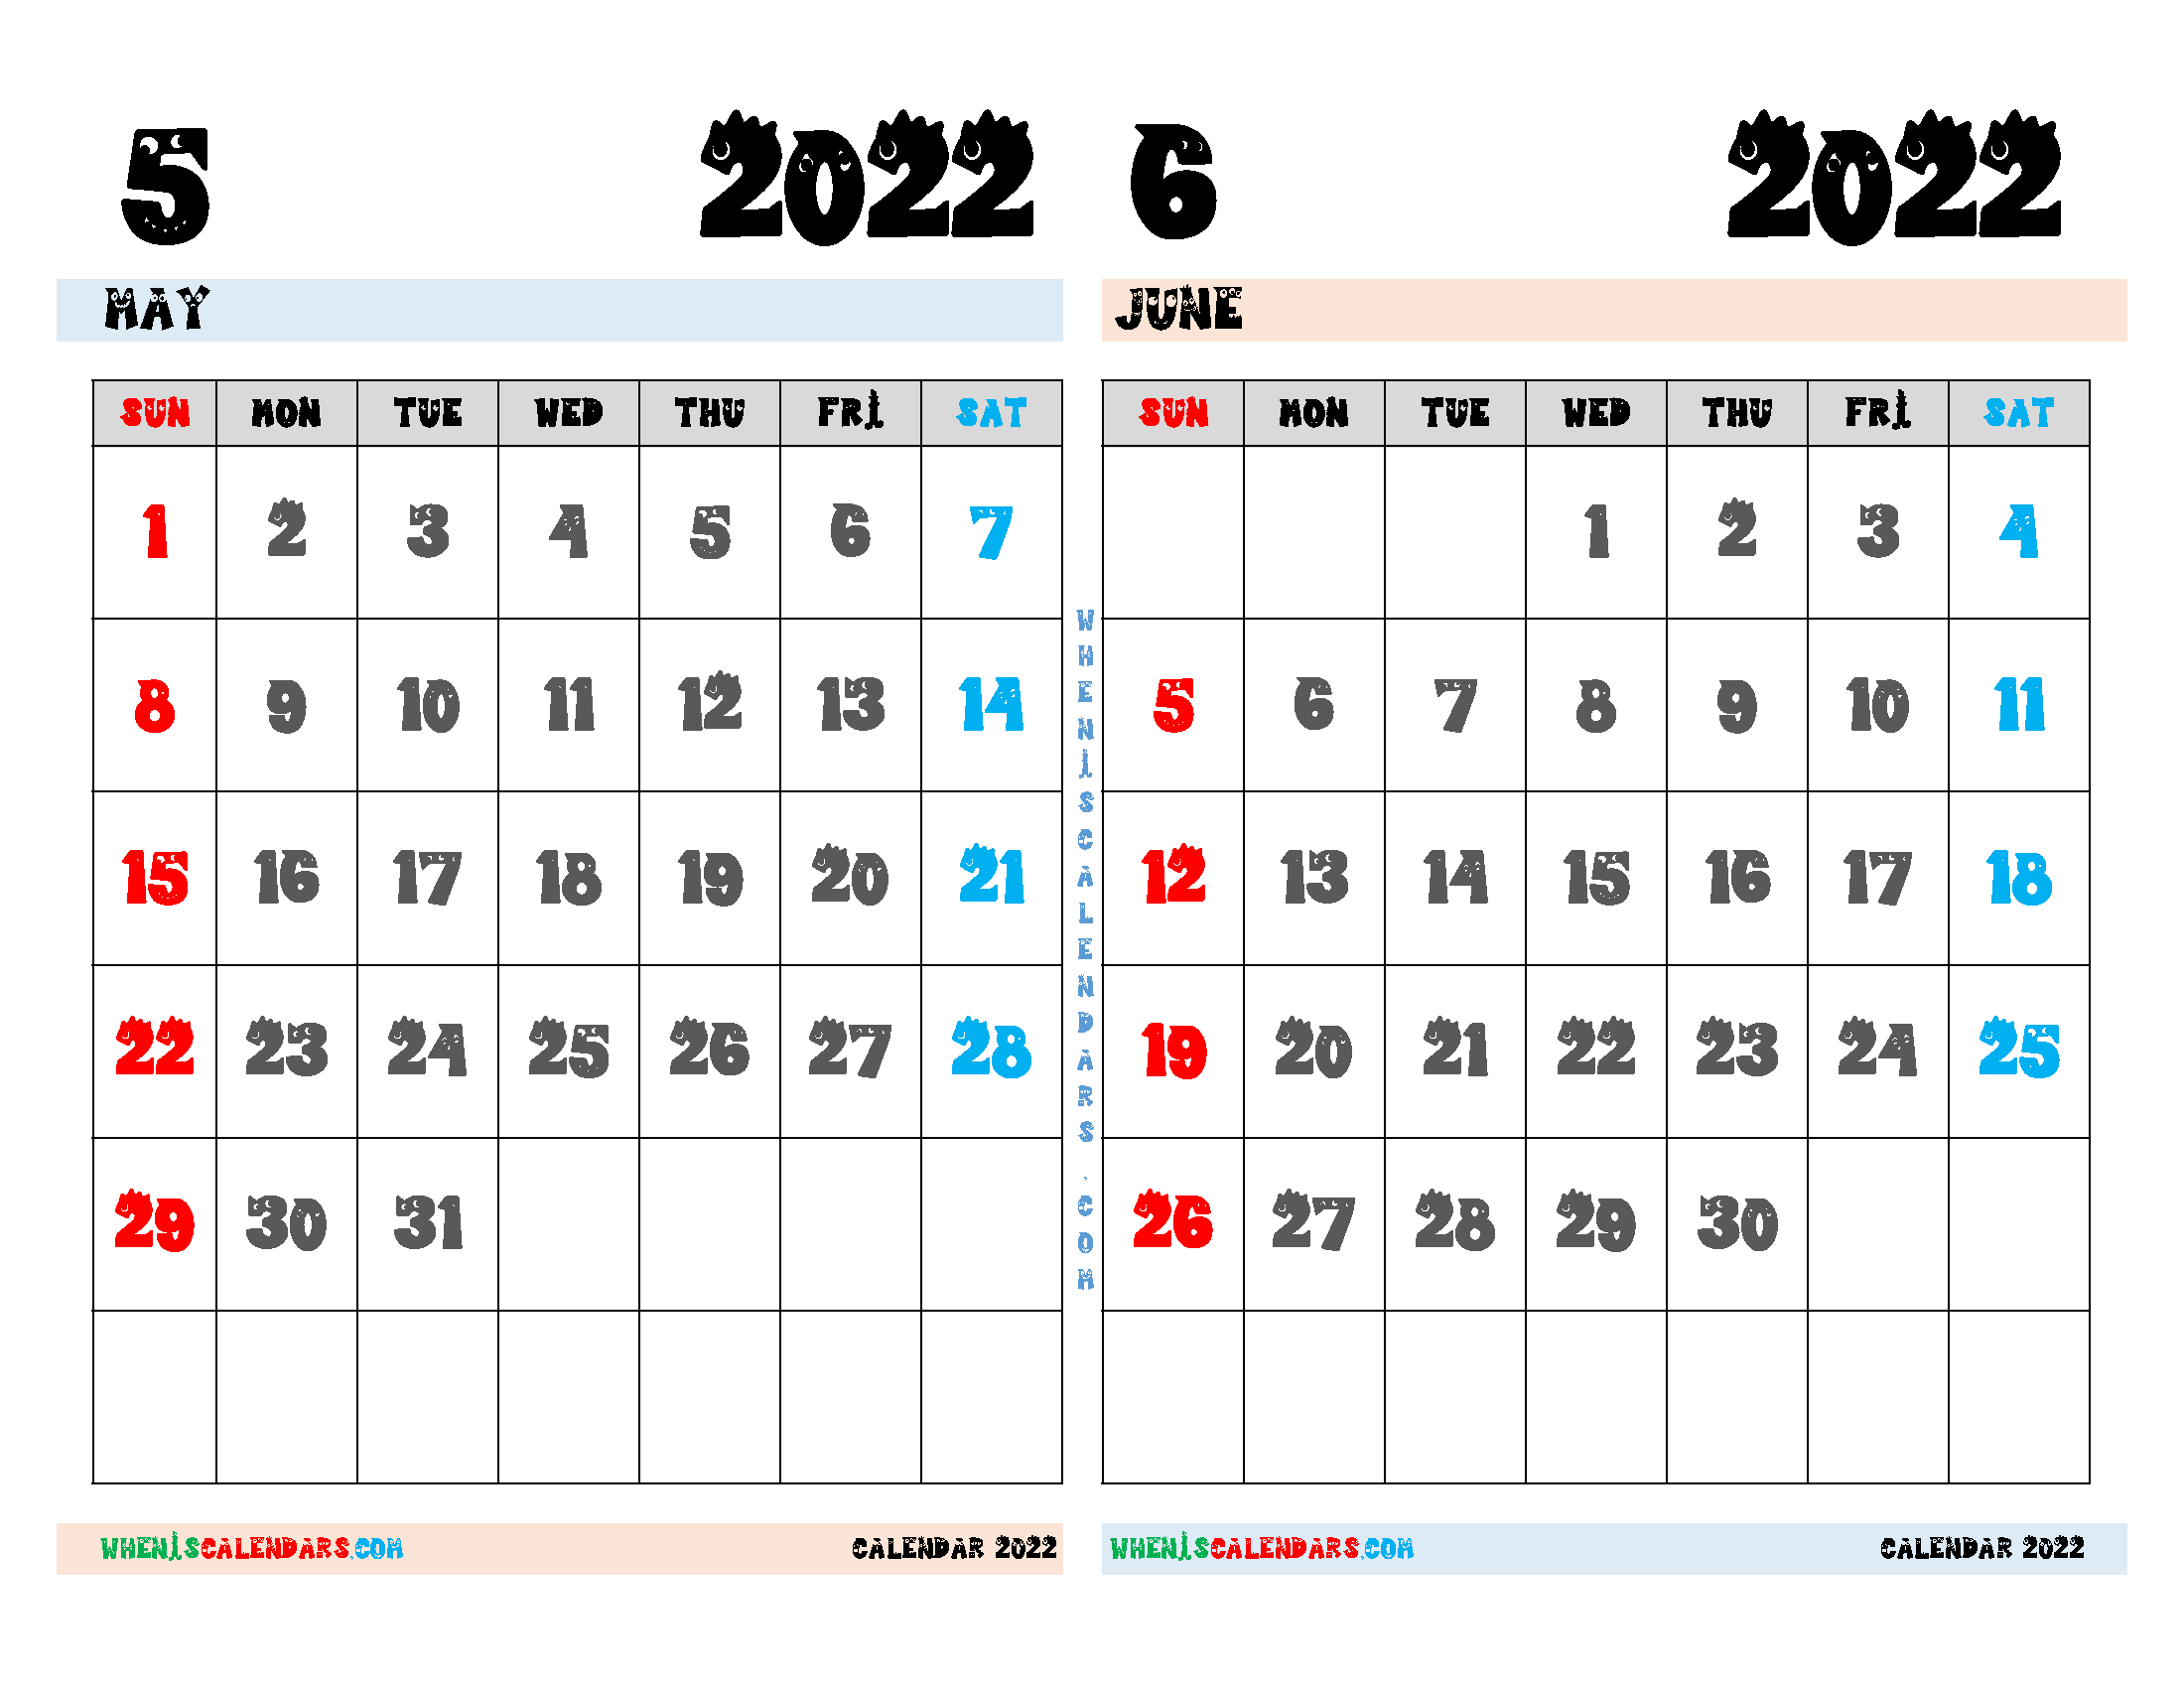 Download Free May and June 2022 Calendar Printable as PDF document and high resolution PNG Image file format (landcape)